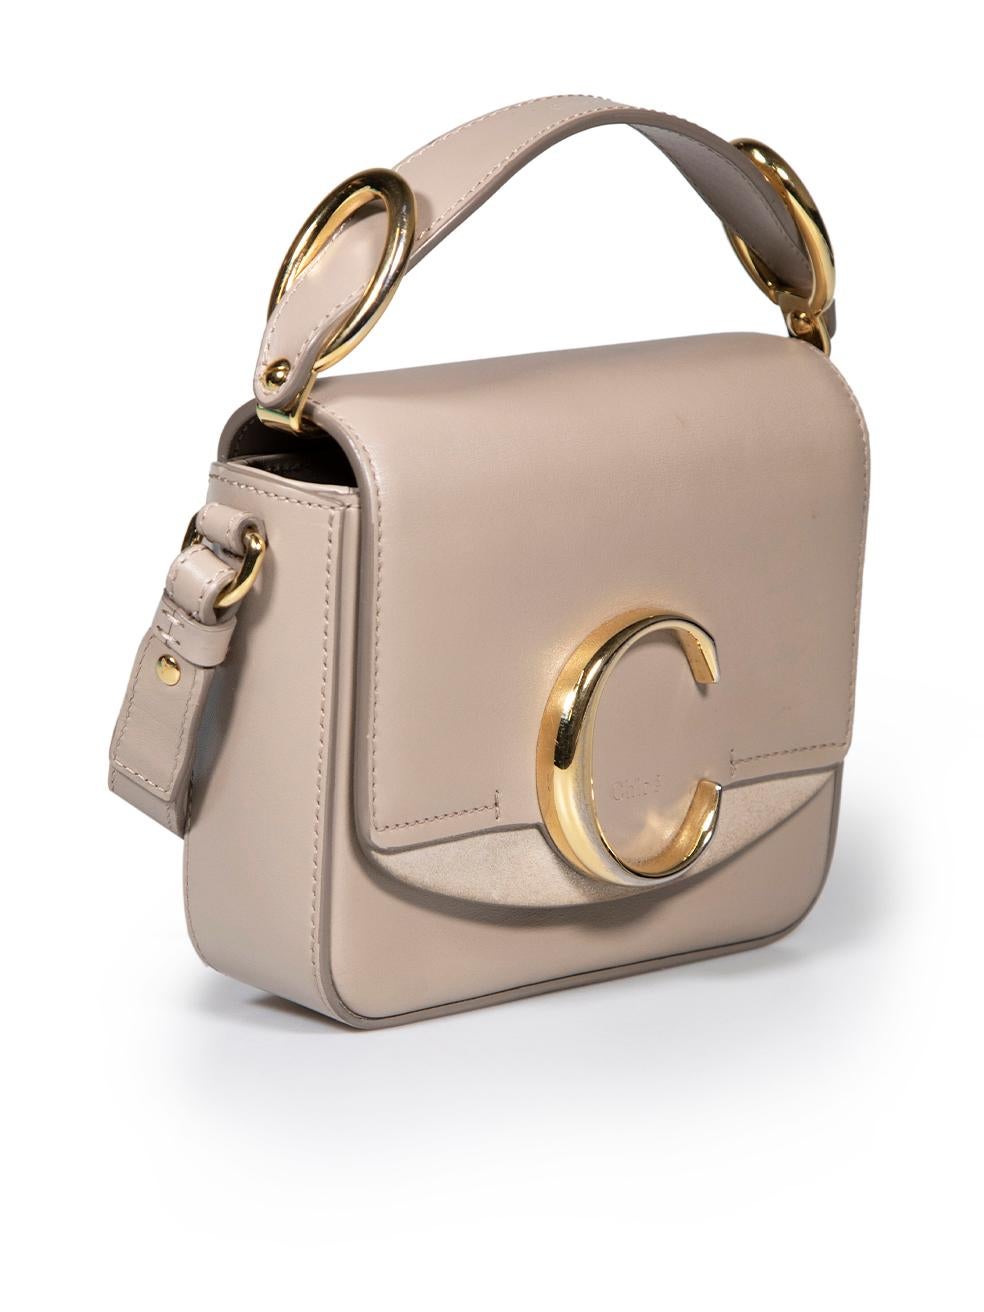 CONDITION is Very good. Minimal wear to bag is evident. Minimal wear to front and back of bag with minor marks and scratches are seen on the gold hardware on this used Chloé designer resale item. Item comes with original dust bag.
 
 
 
 Details
 
